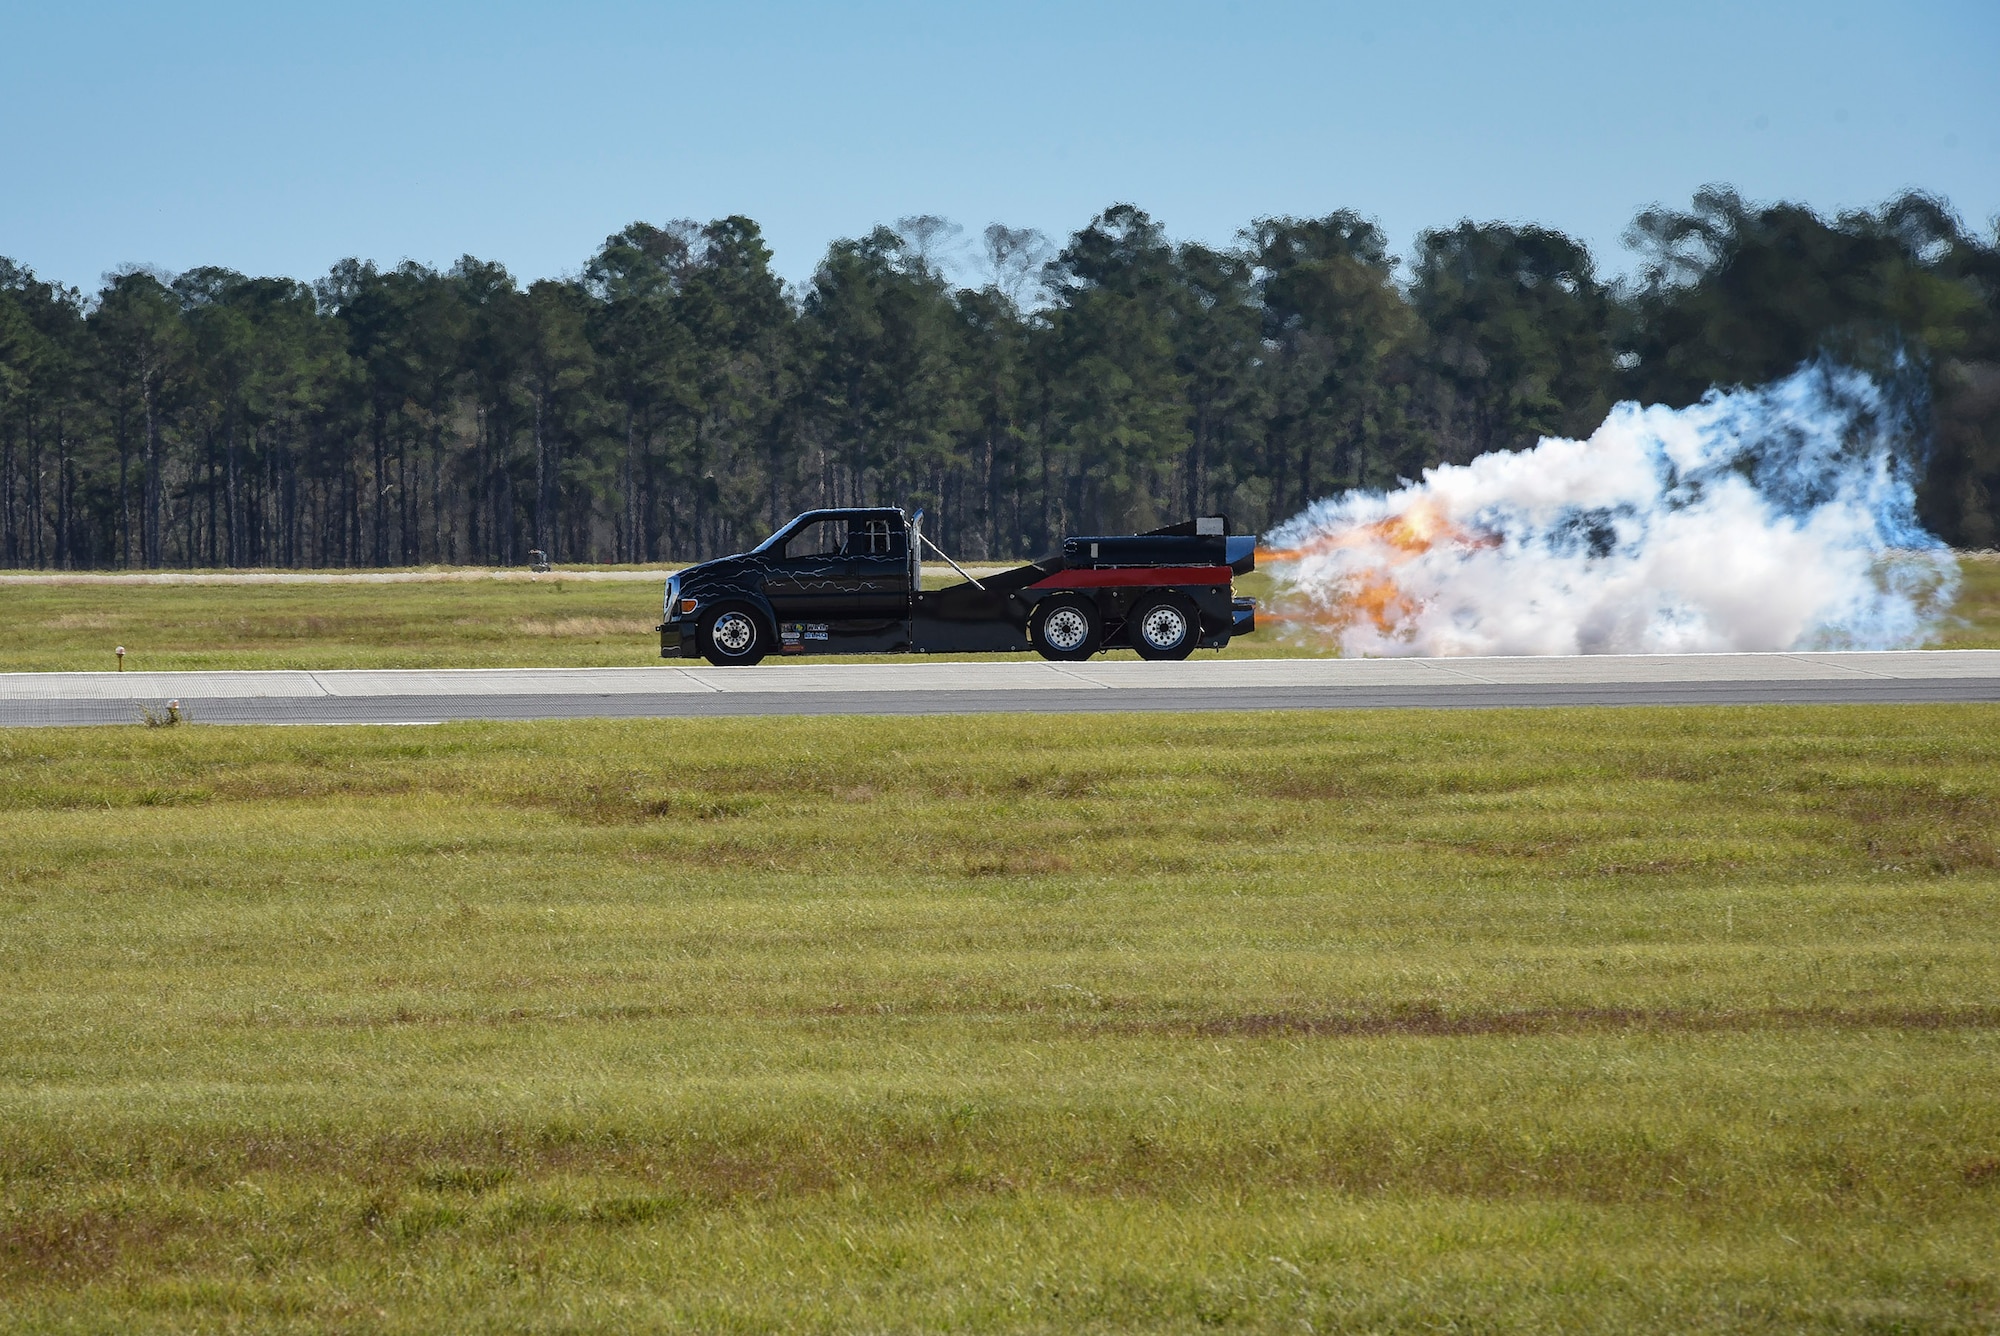 Jet Truck “Homewrecker” speeds down Moody’s flightline during the 2017 Thunder Over South Georgia Air Show, Oct. 28, 2017, at Moody Air Force Base, Ga. The air show aims to educate the public on past and present Air Force aerial capabilities, increase recruiting and show appreciation to the local community. (U.S. Air Force photo by Senior Airman Greg Nash)